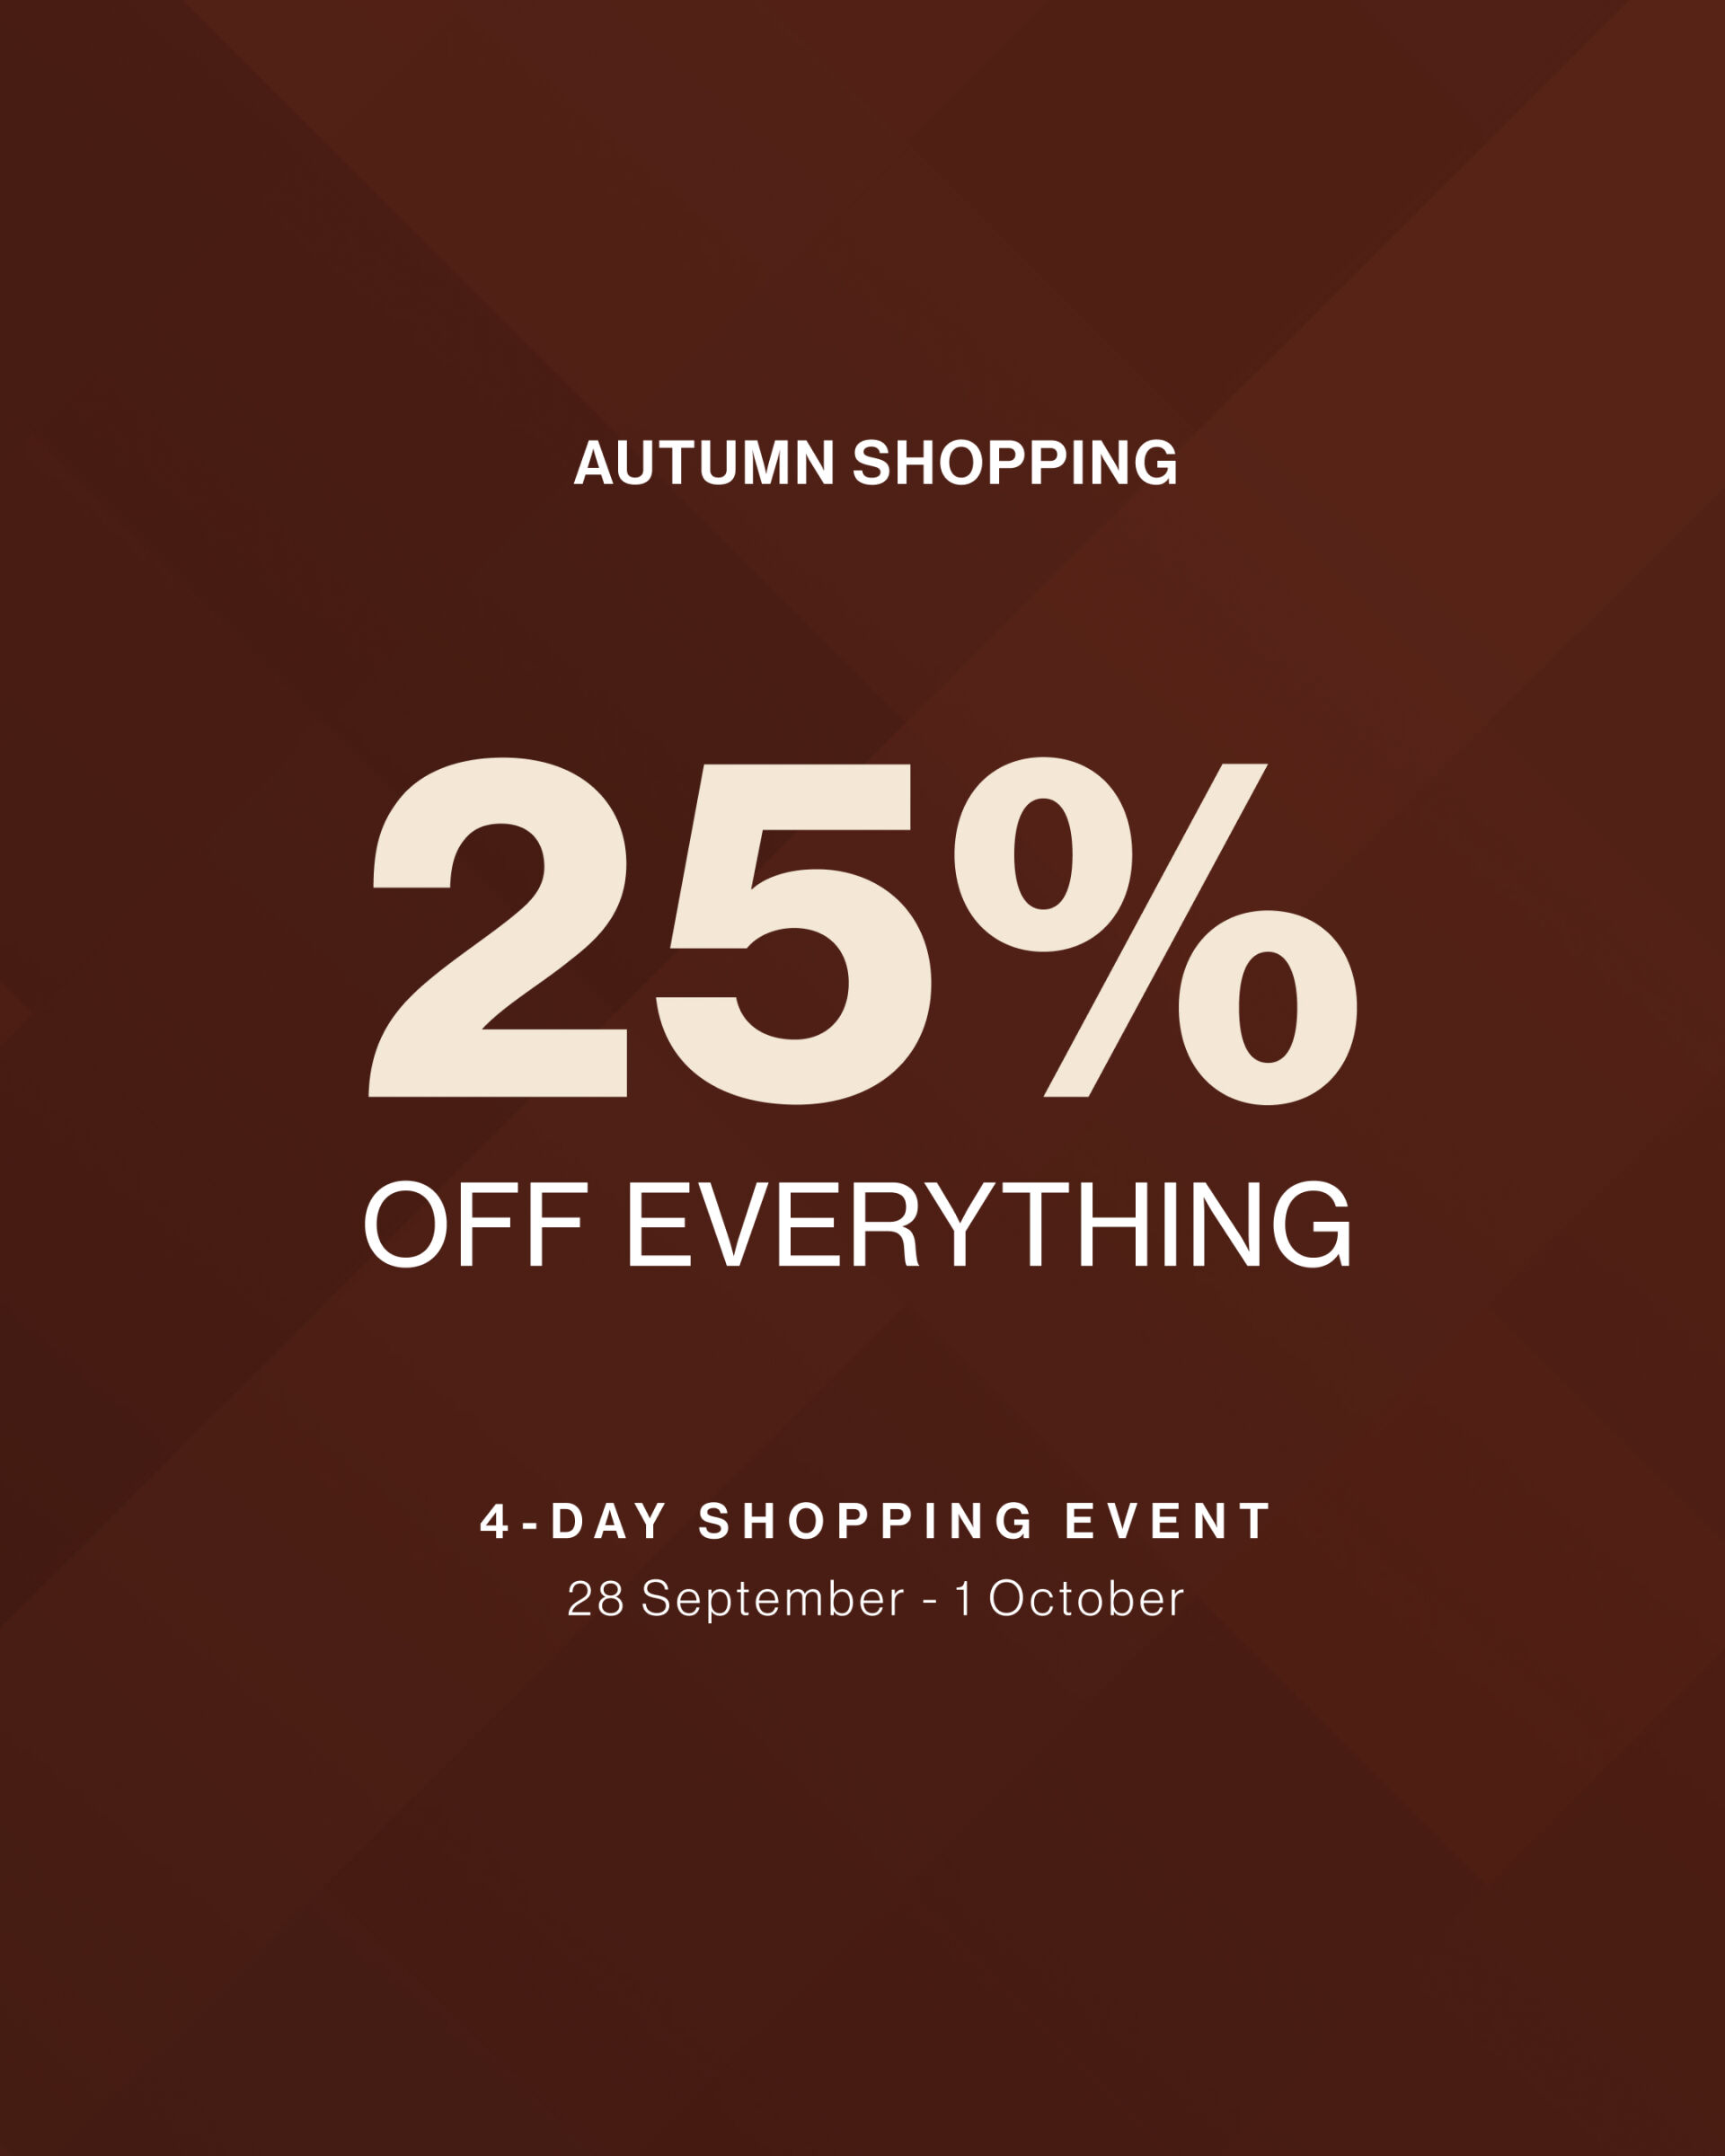 4-day shopping event